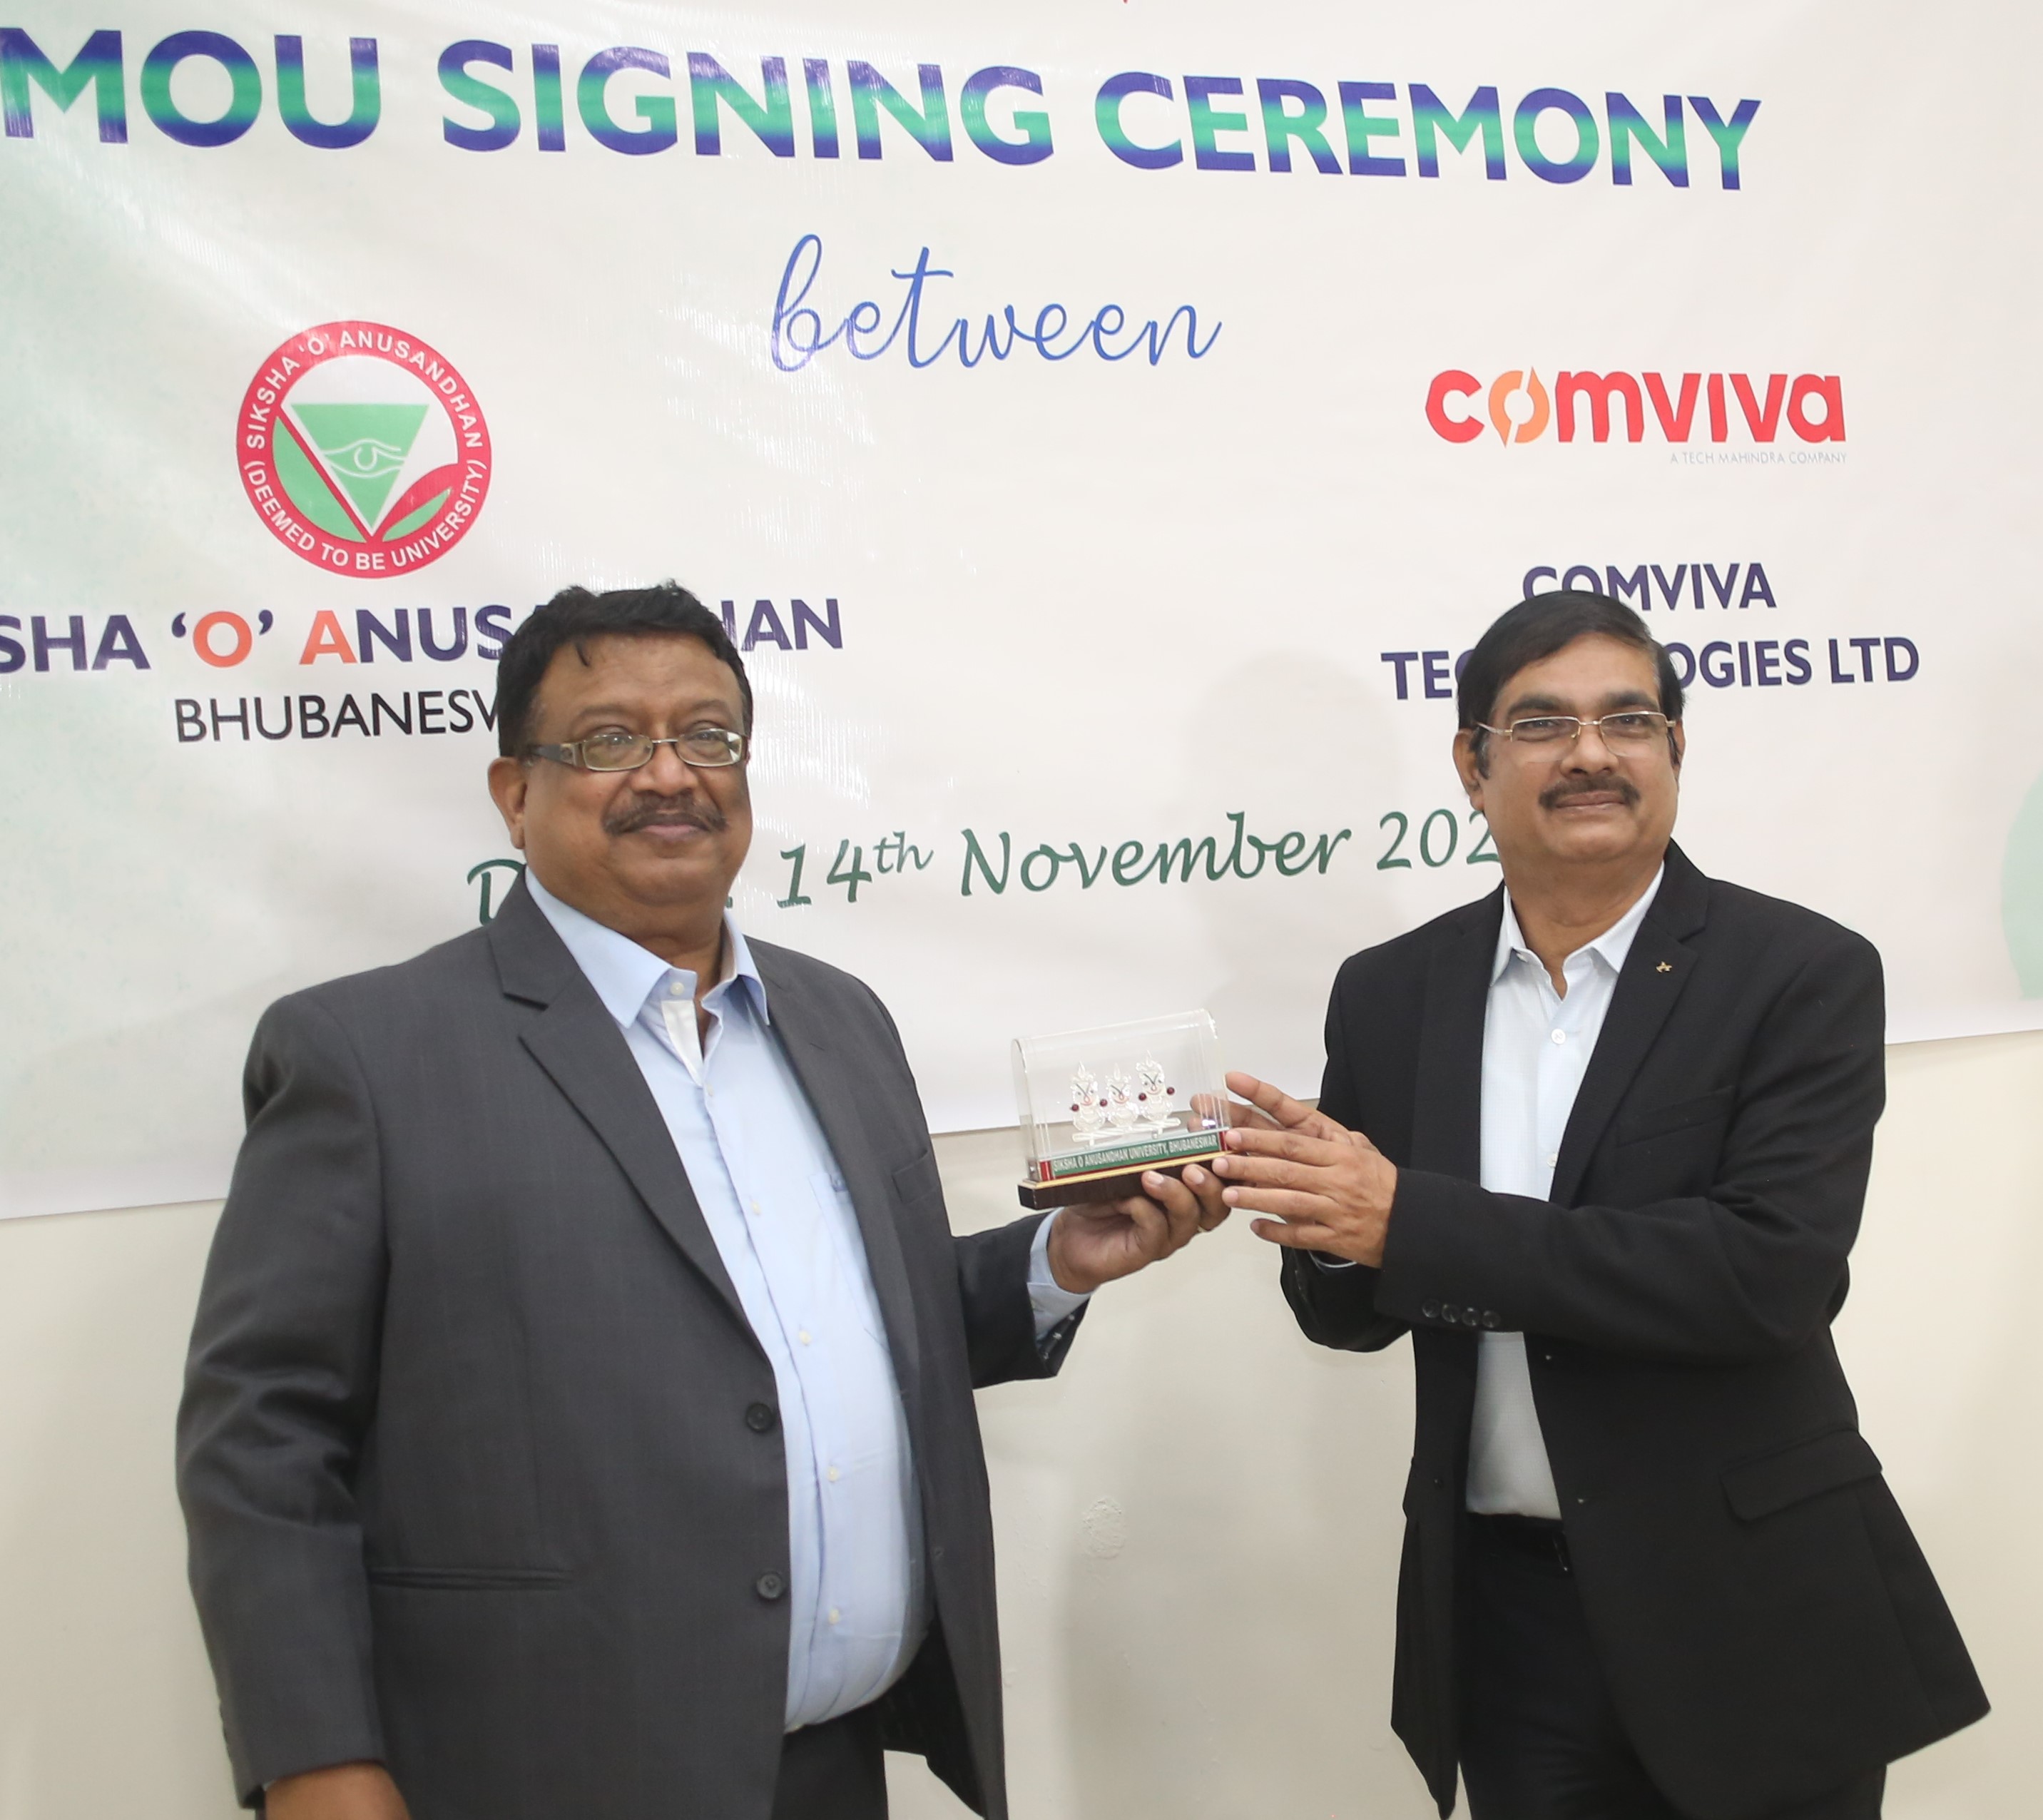 Comviva partners with top universities in Bhubaneswar to develop market-appropriate top technology talent